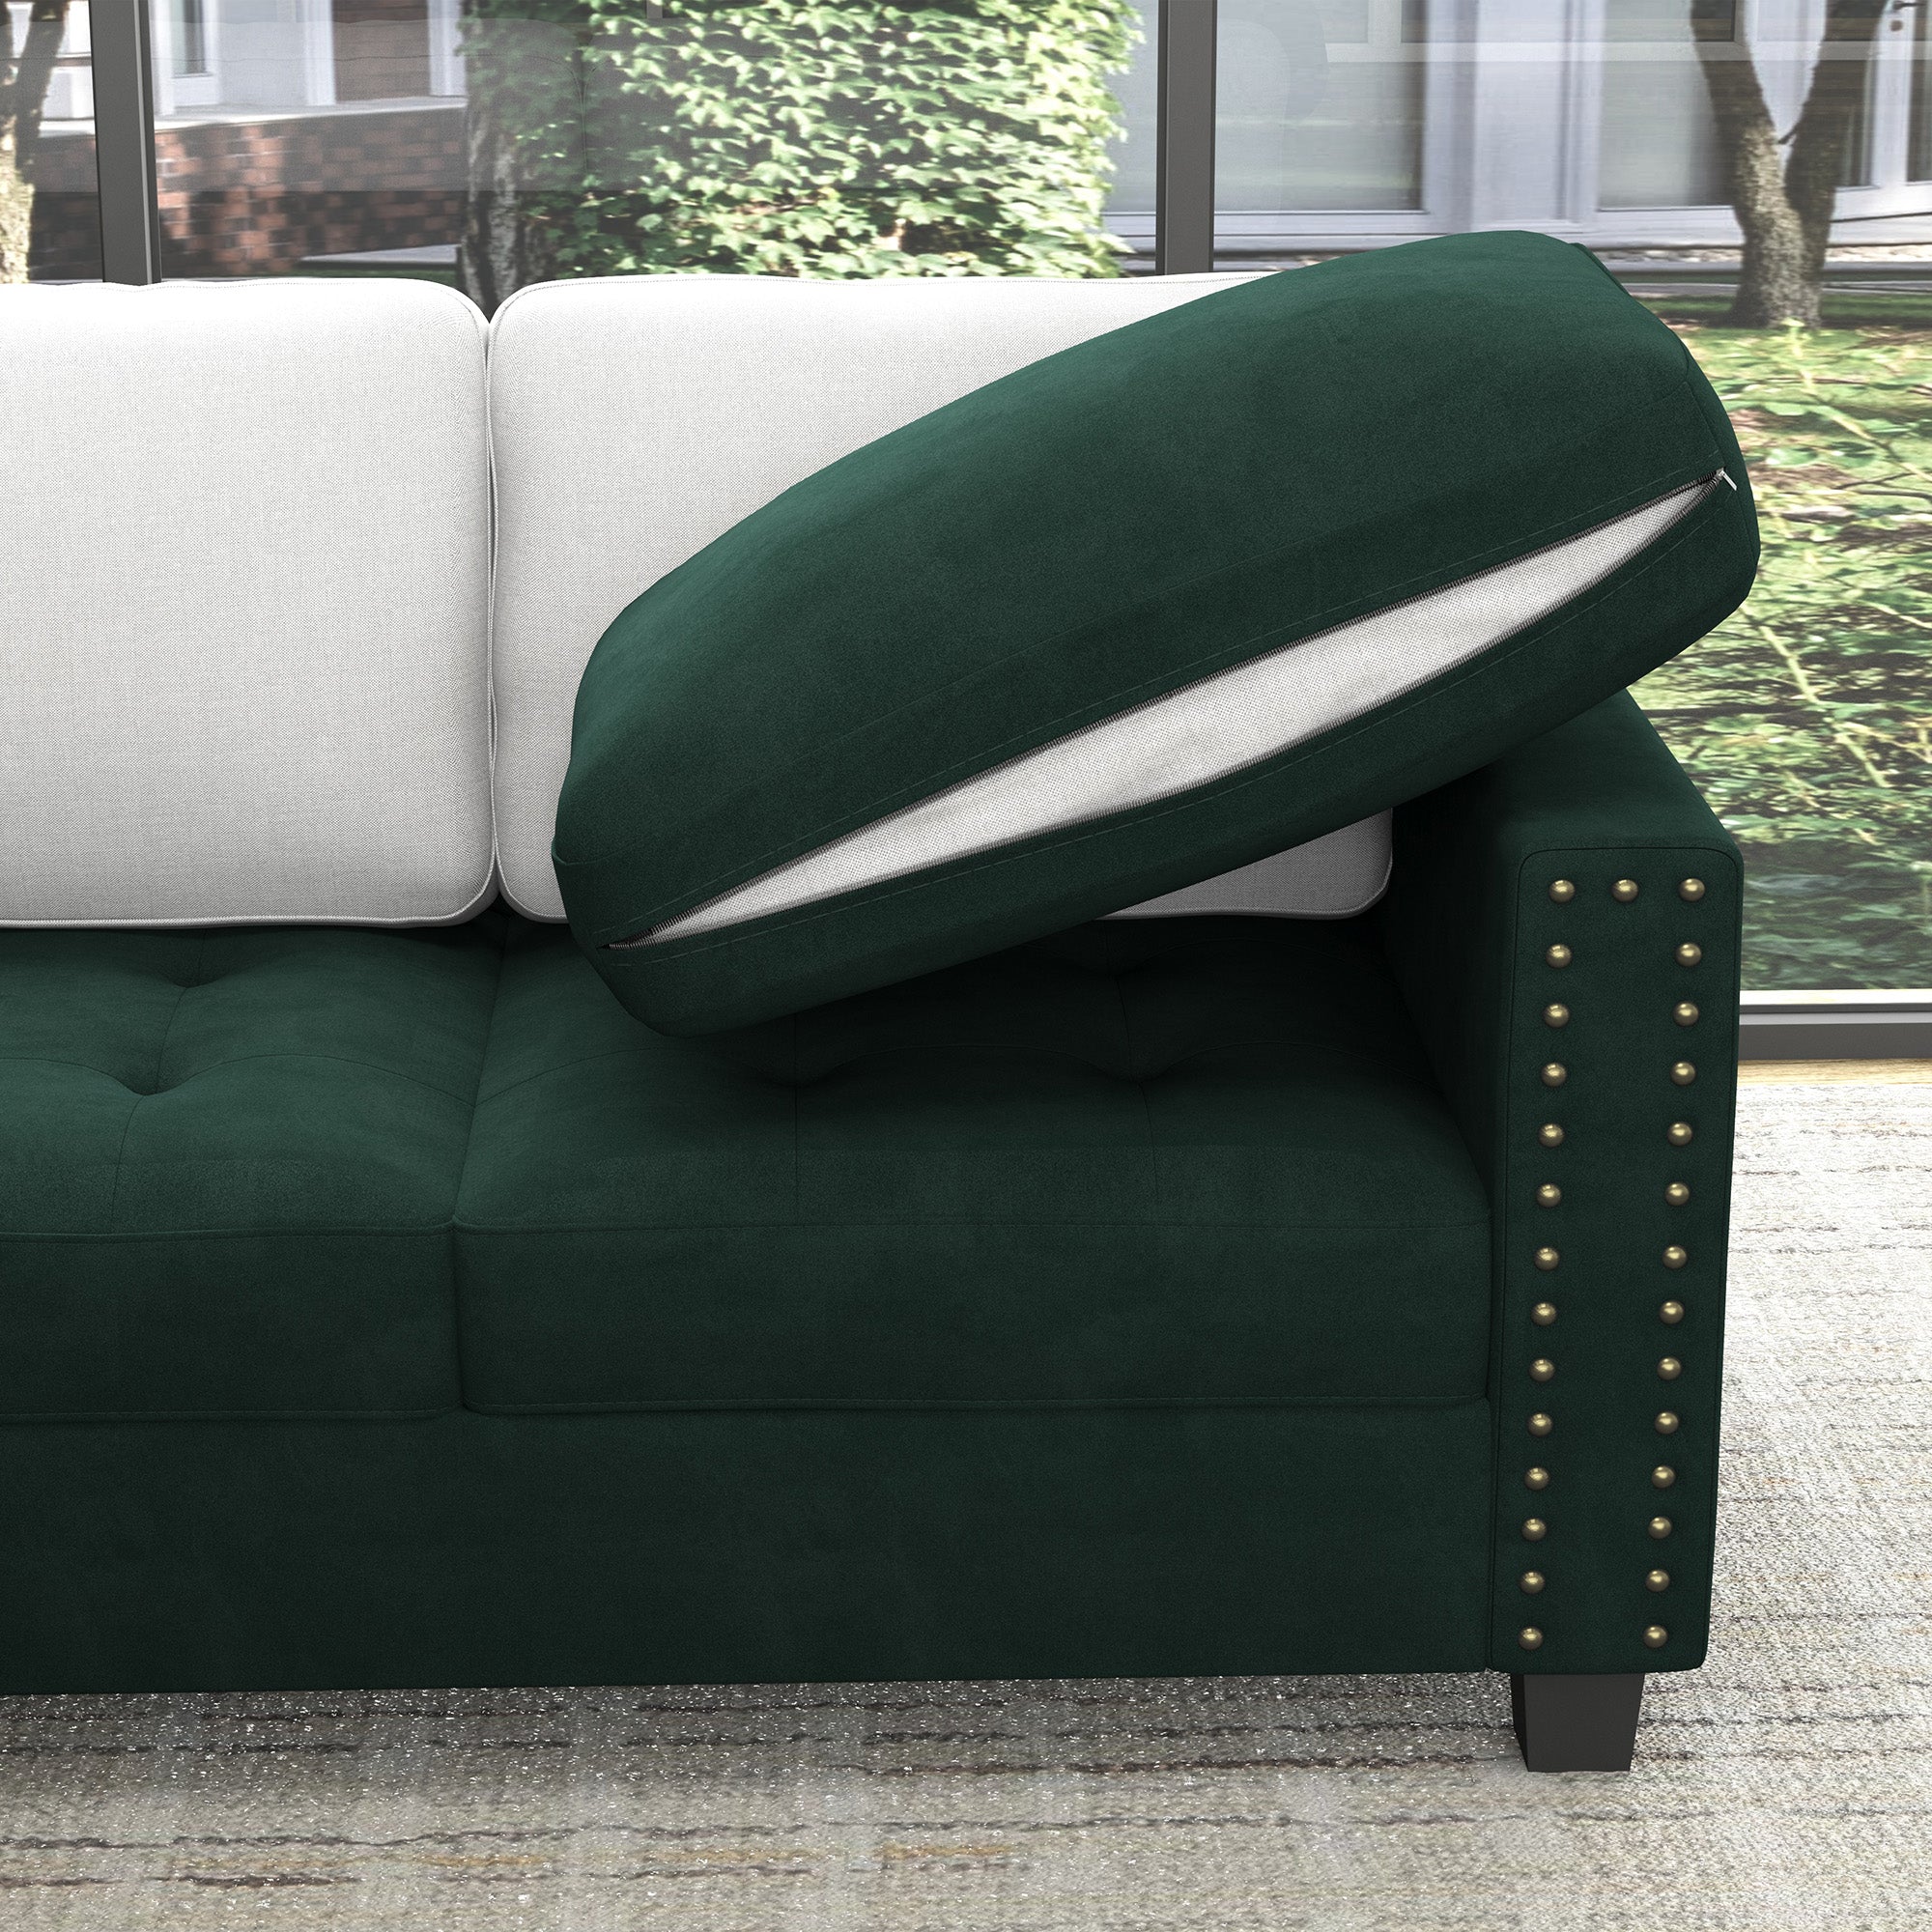 HONBAY Velvet Sectional Couch, U Shaped Sectional Sofa with Chaise Modular Sectional with Storage Ottoman for Living Room #Color_Green